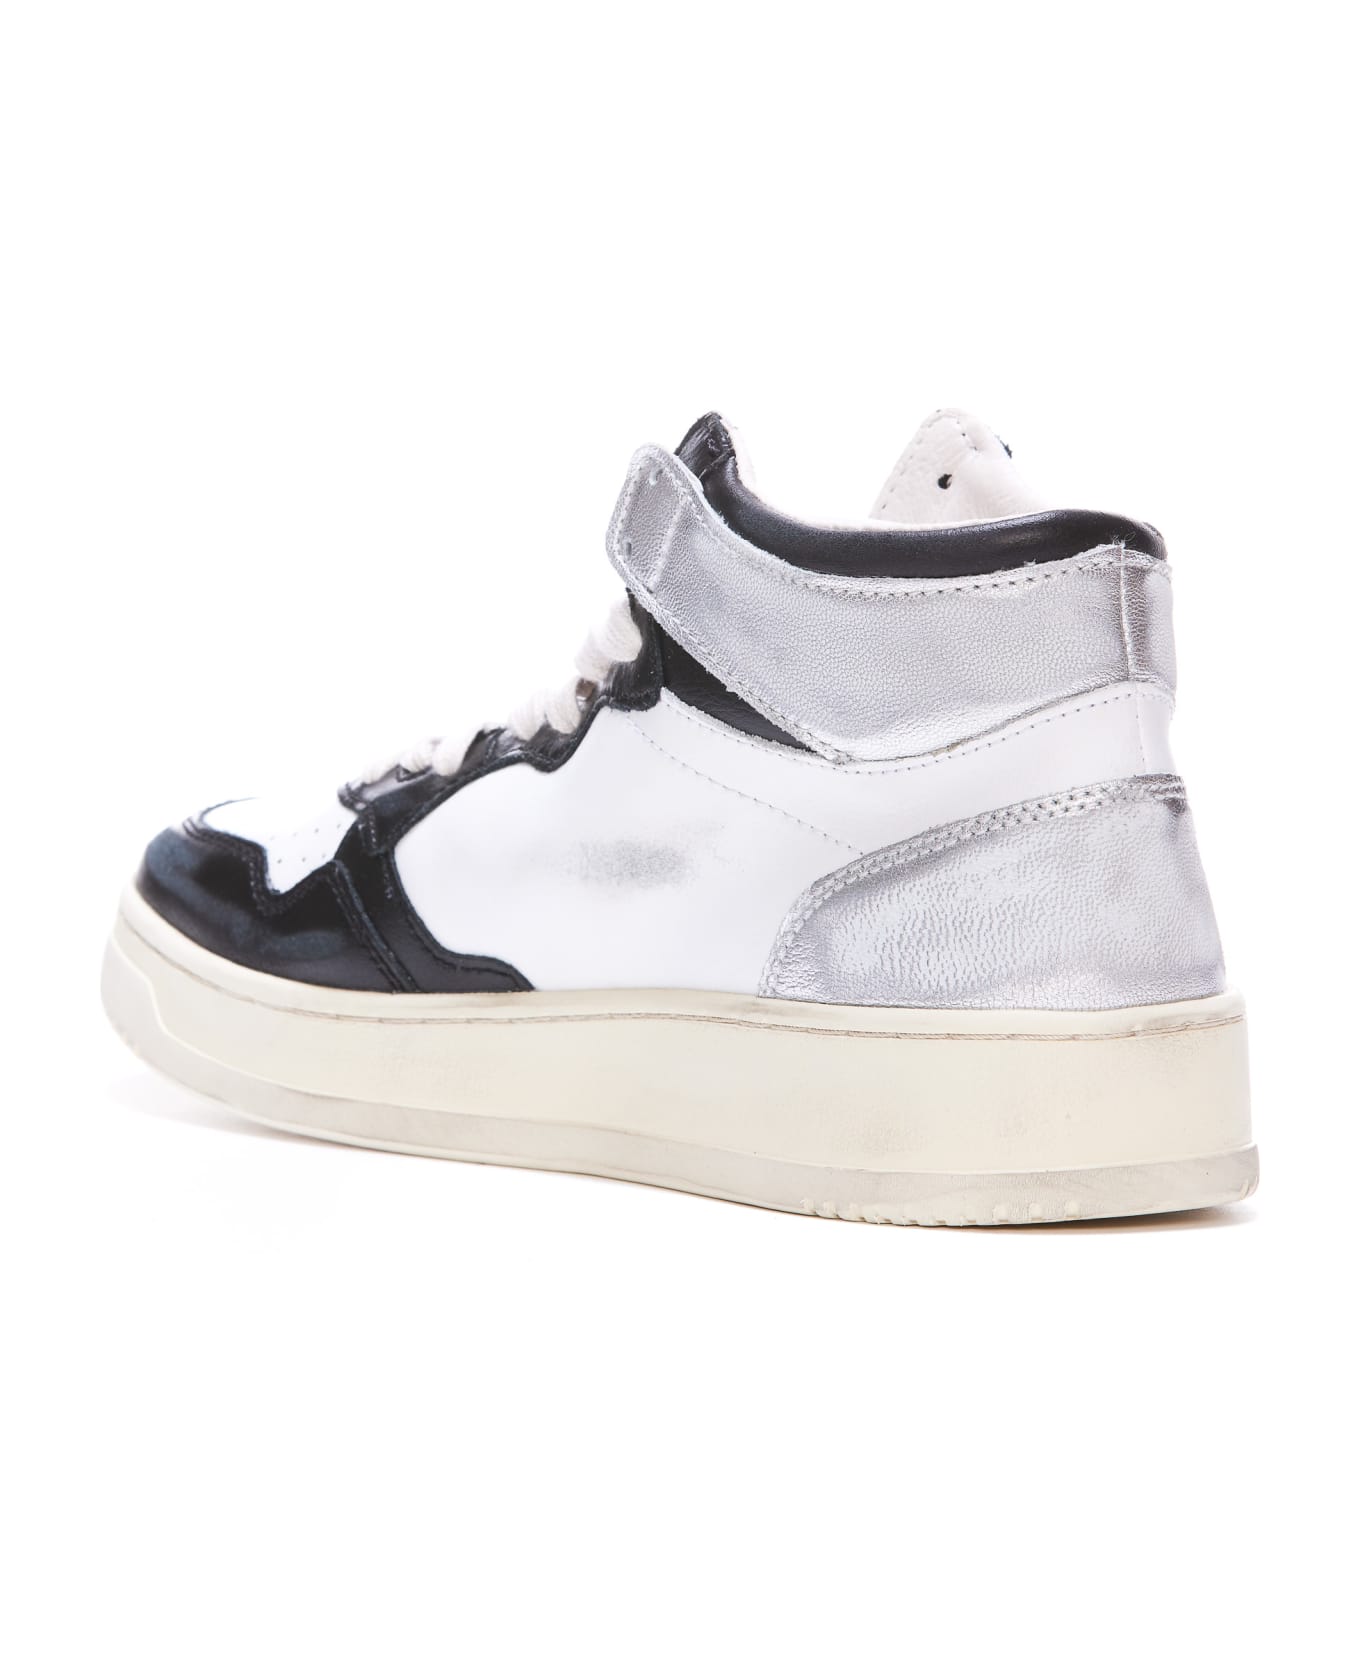 Autry Vintage Medalist Mid Sneakers - White, black, silver スニーカー